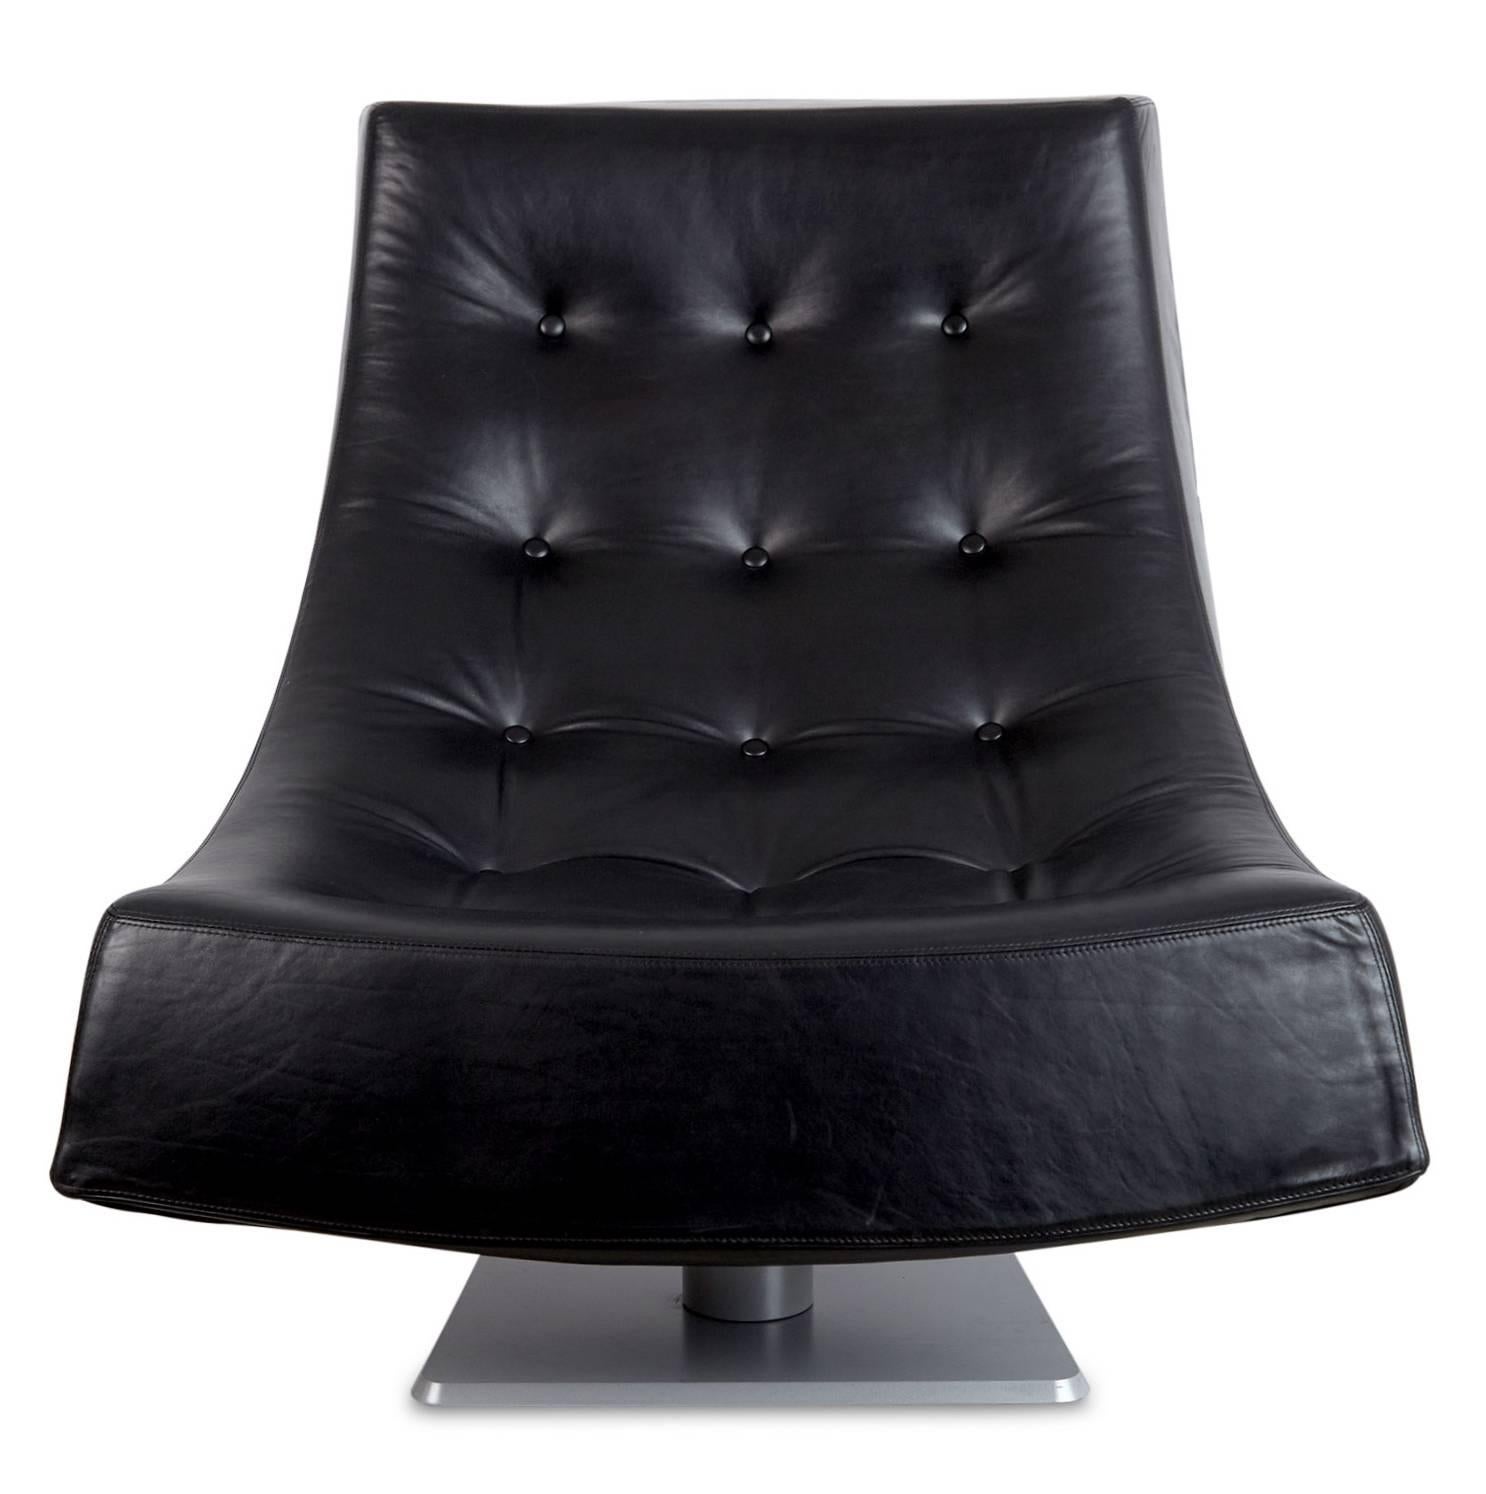 Generously proportioned tufted black leather scoop style lounge chairs. These armless chairs have a semi-swivel mechanism, perfect for diverting your conversation focus from a comfortable seated position. The gentle curve of these laid back chairs